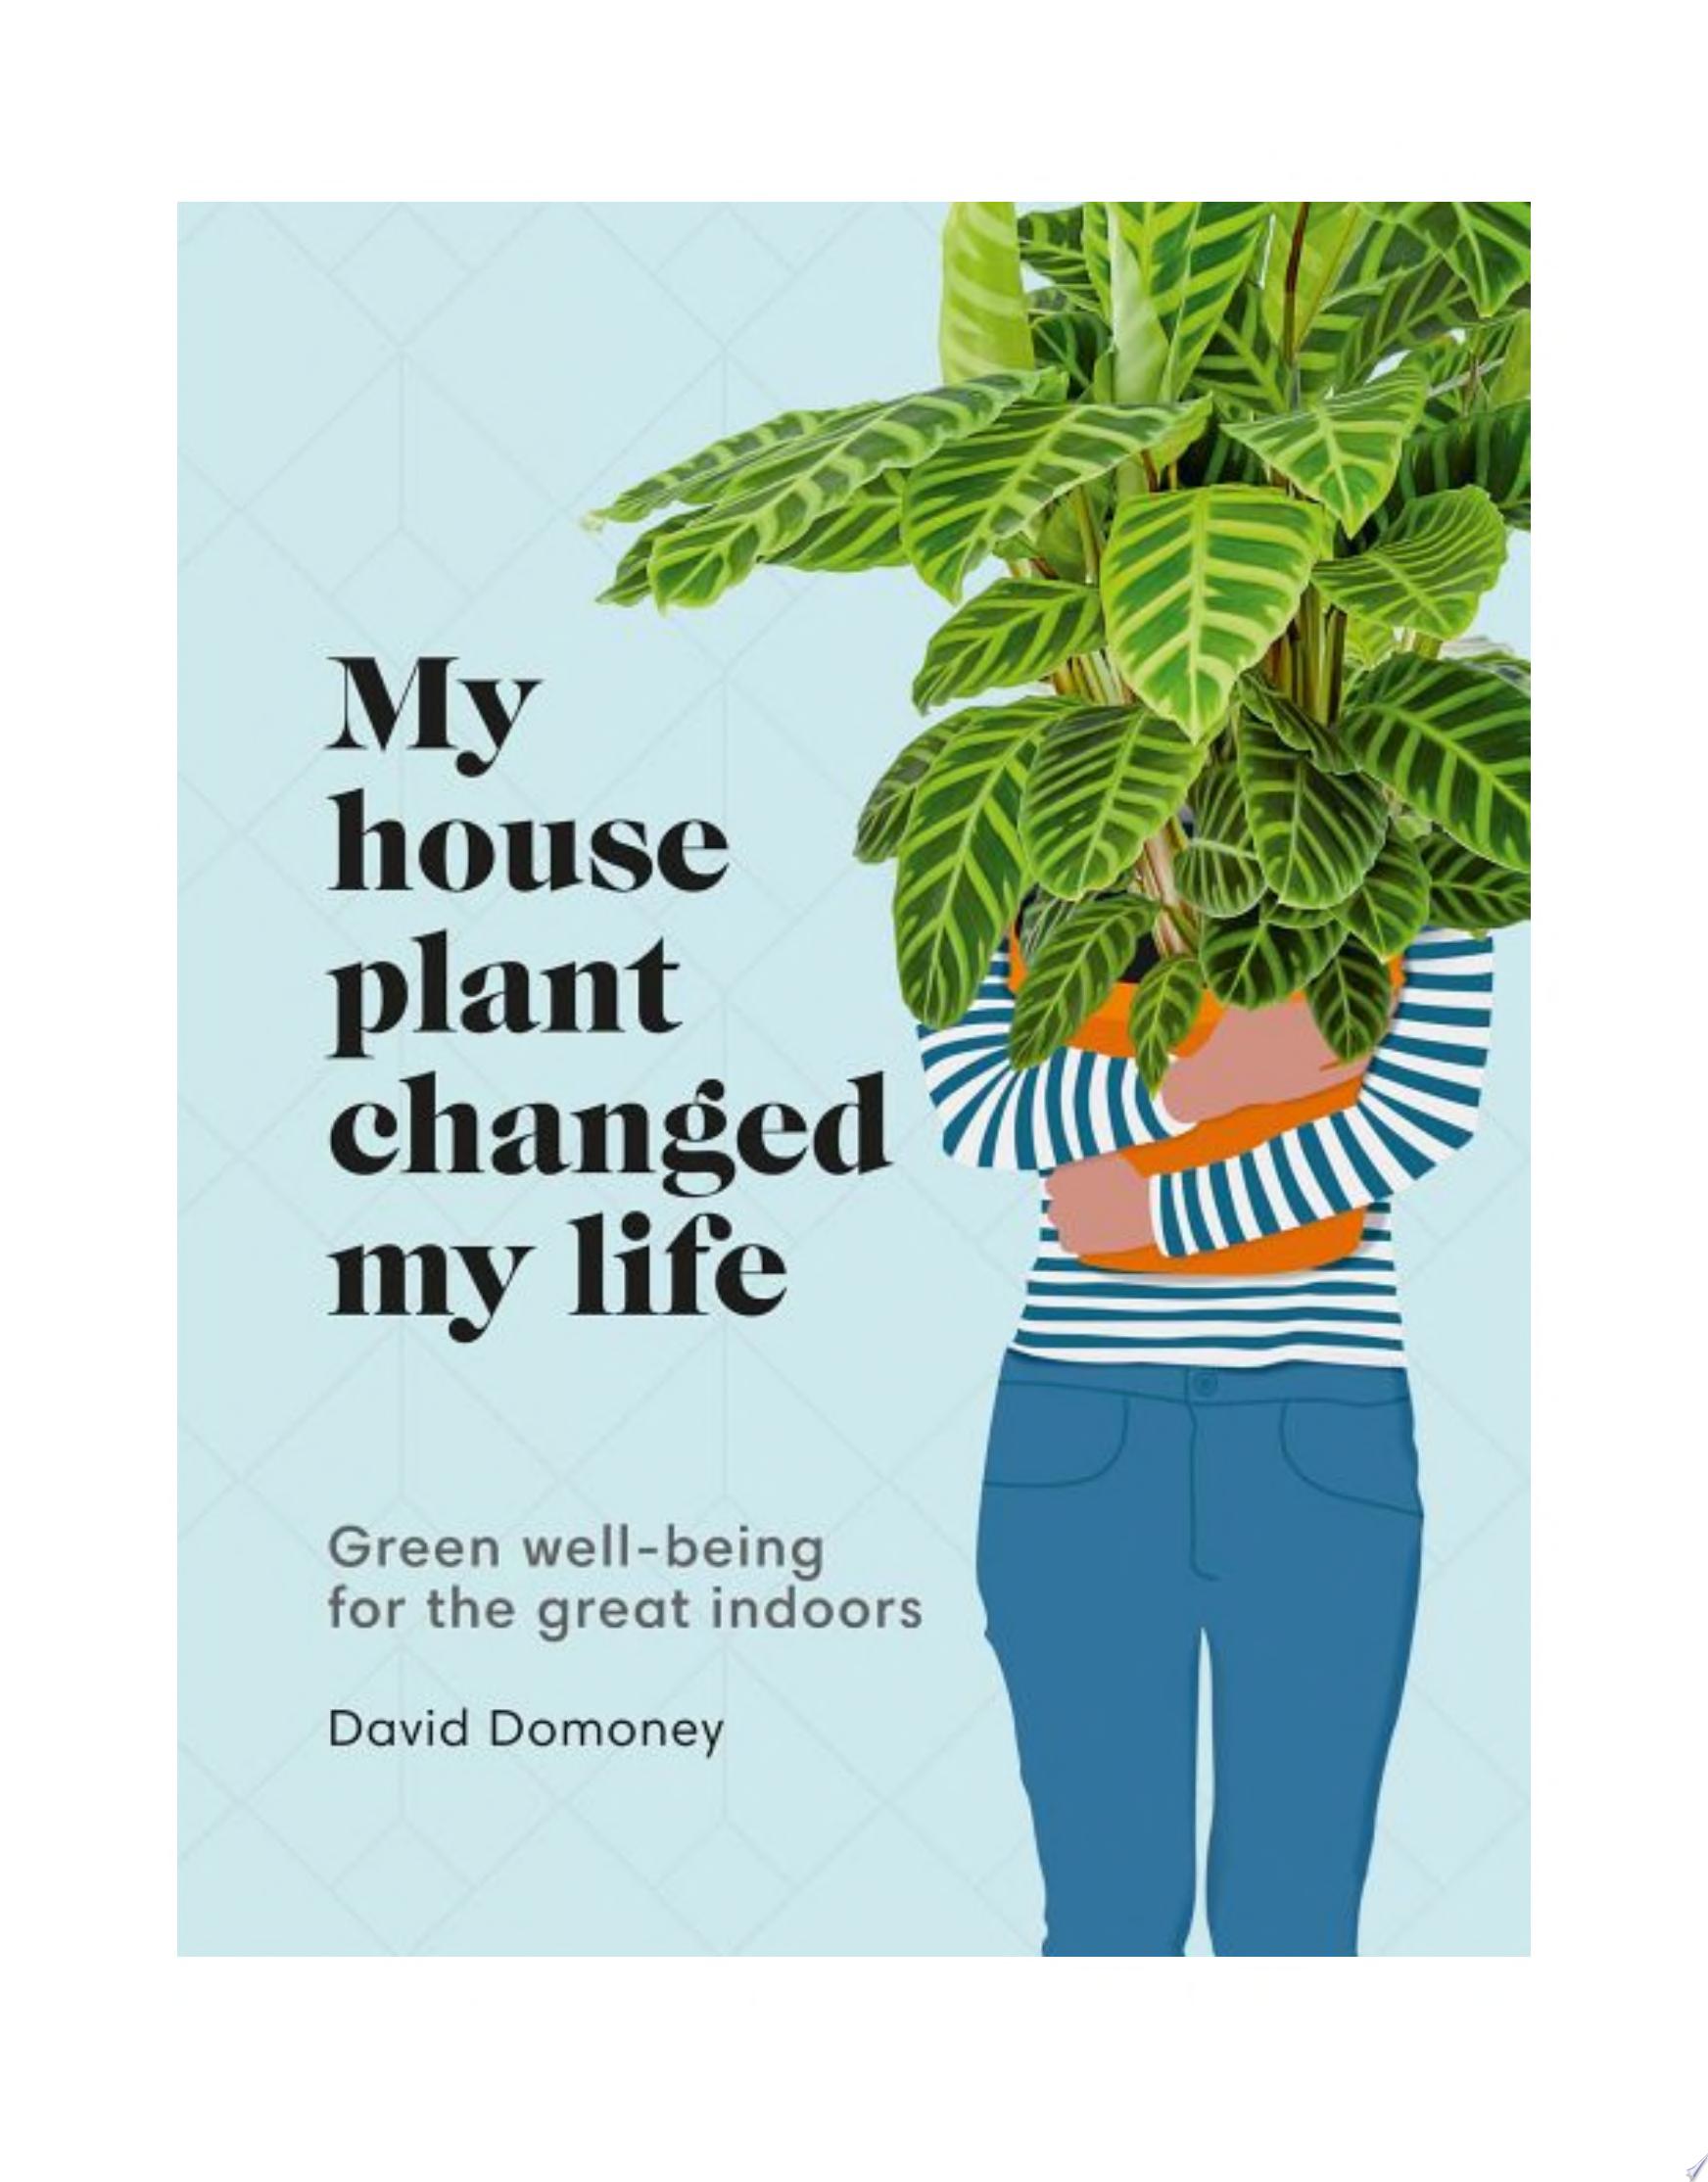 Image for "My Houseplant Changed My Life"